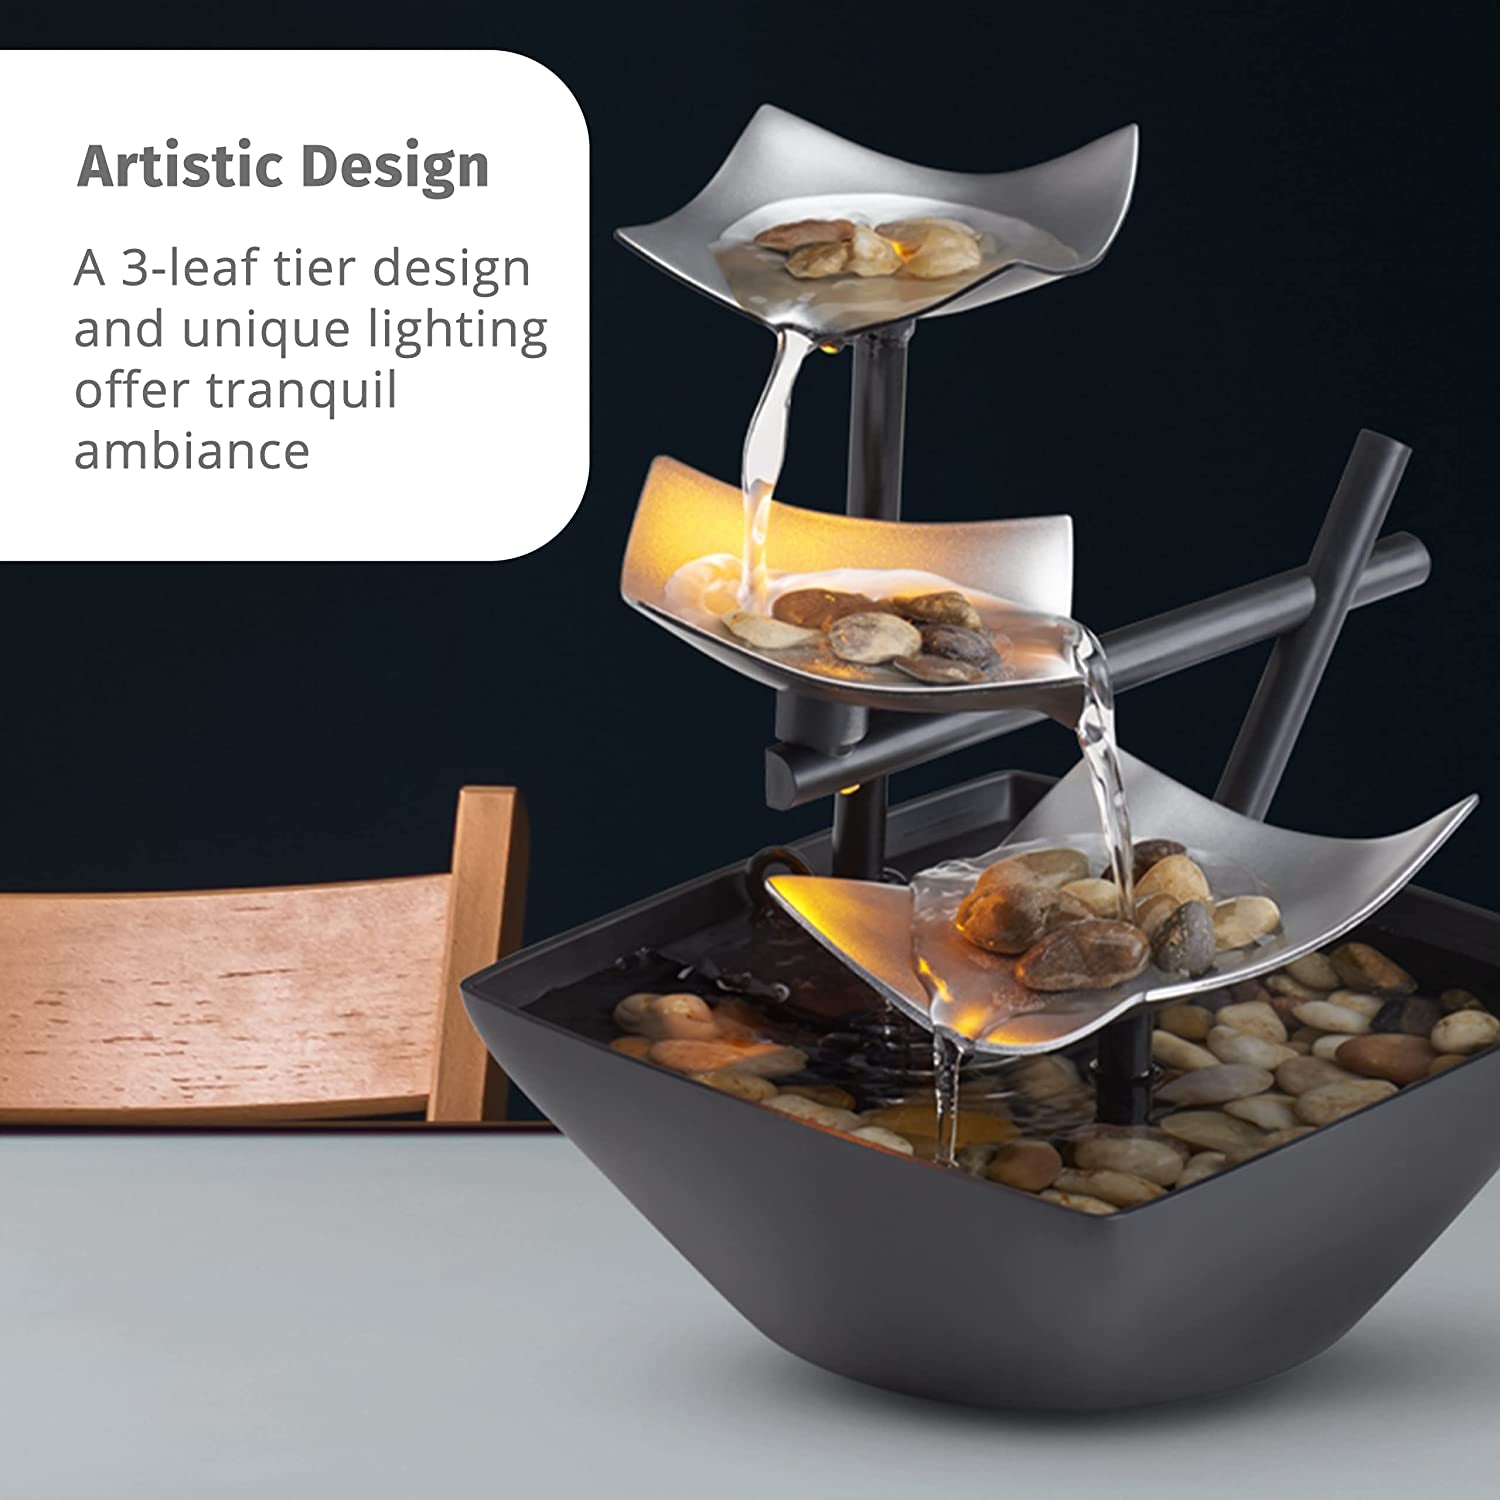 Tabletop Water Fountain, Home Décor Soothing Sound Machine with Automatic Pump, Deep Basin and Natural River Rocks. Indoor Zen Relaxation for Office, Living Room, or Bedroom Décor. 8.25” Tall